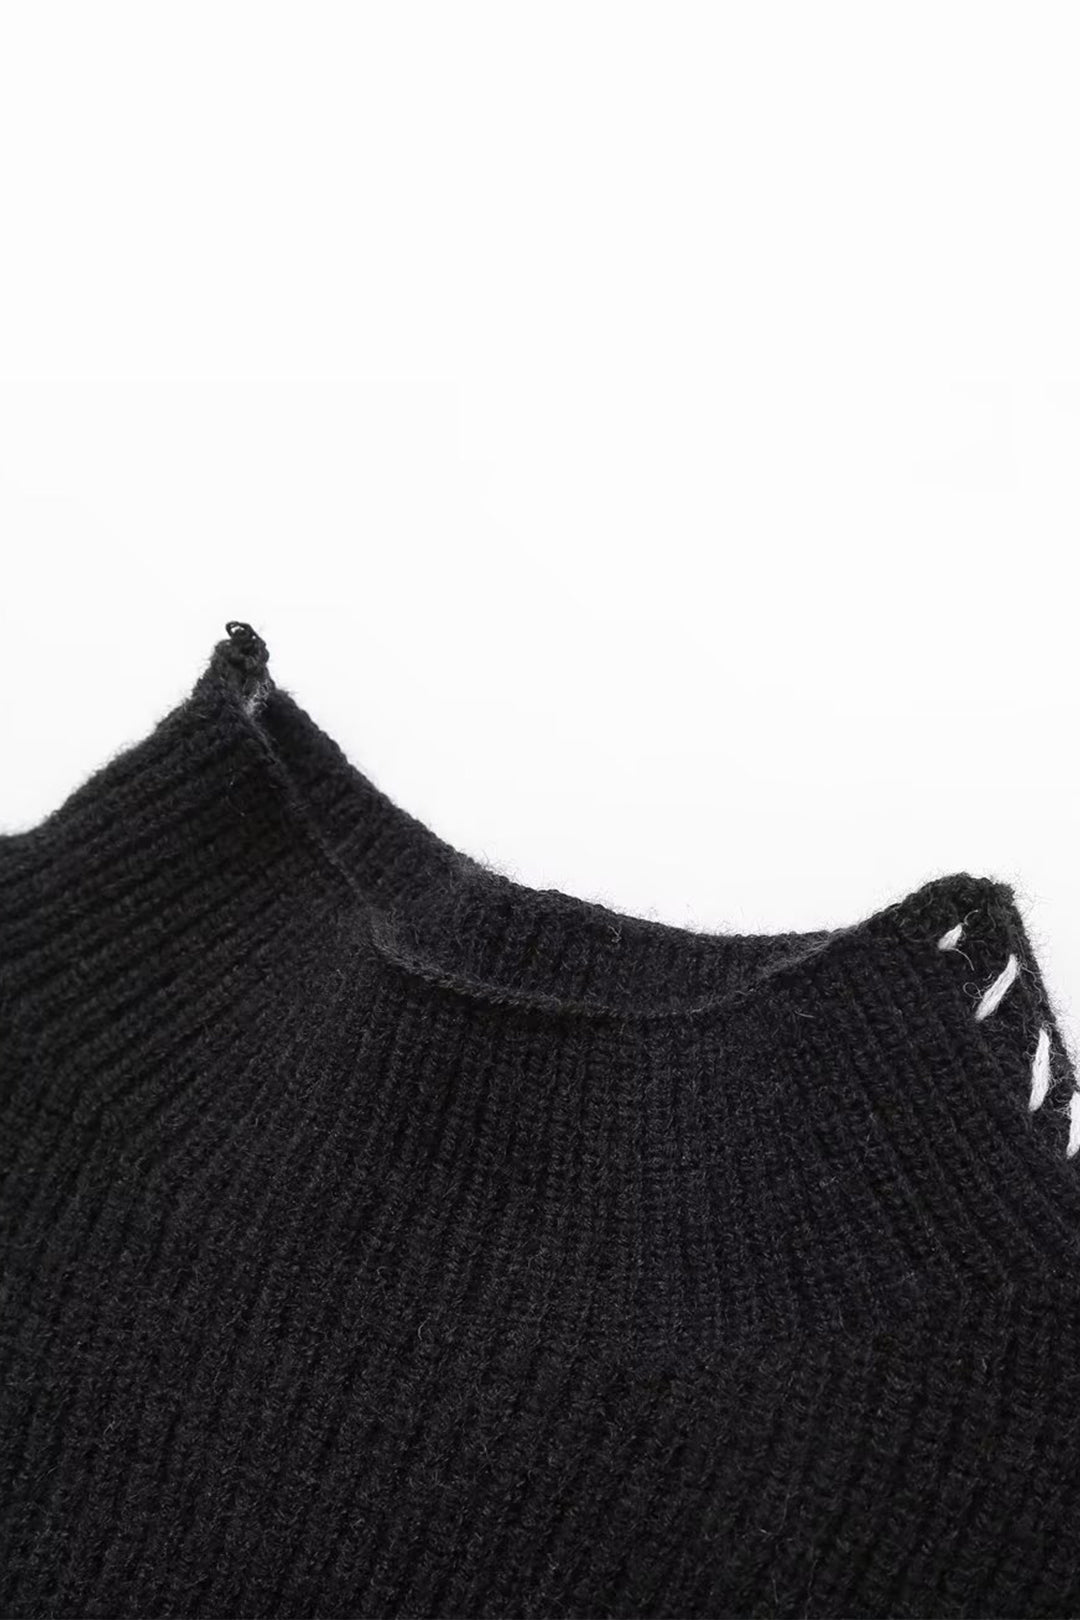 Contrast Whipstitching Turtleneck Long Sleeve Sweater